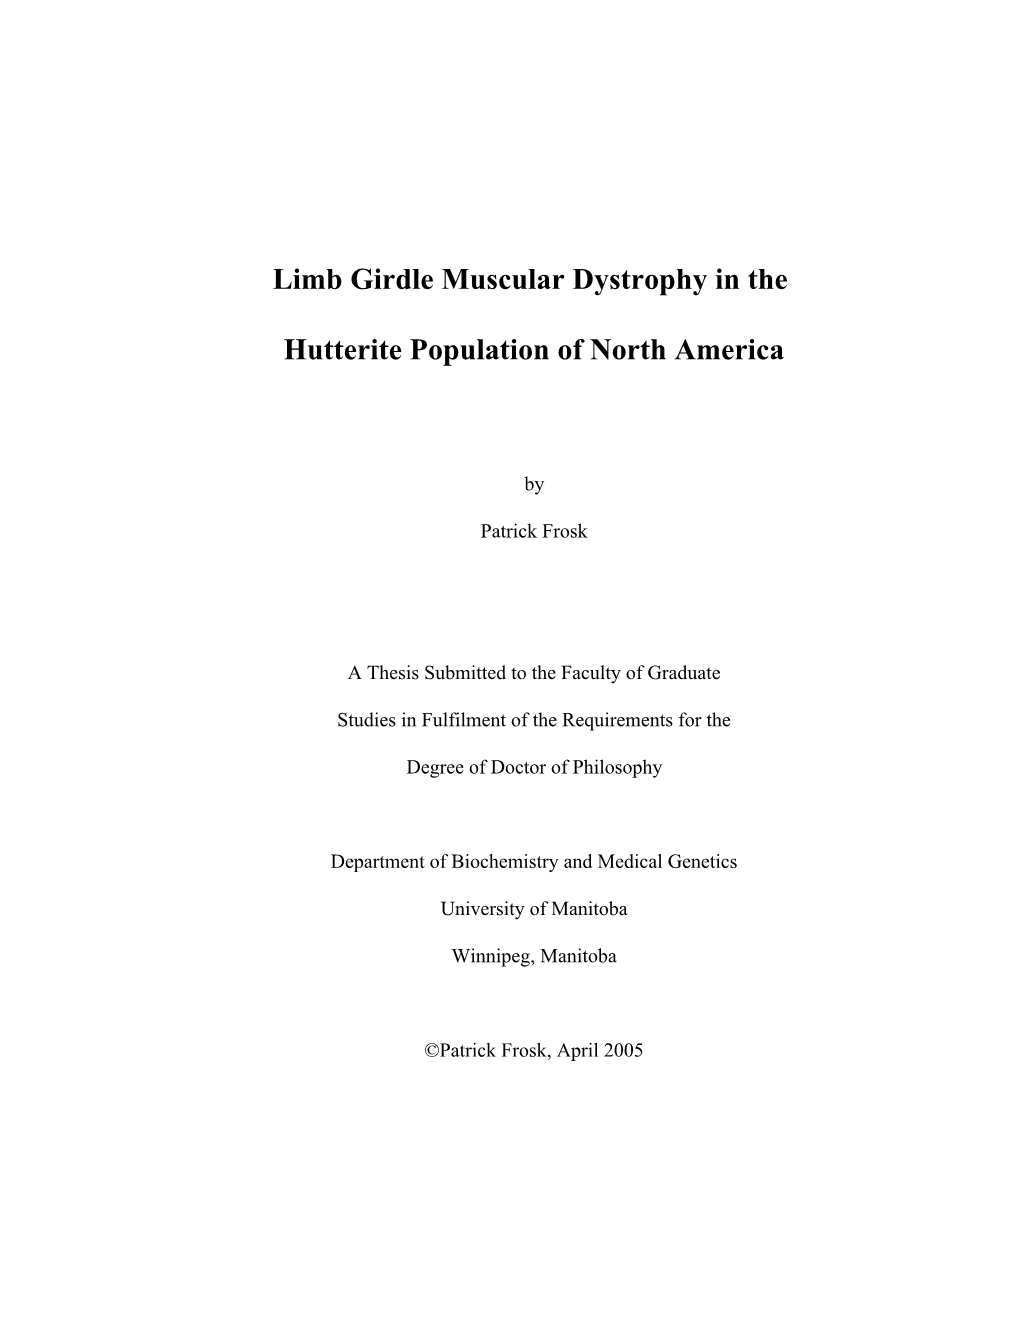 Limb Girdle Muscular Dystrophy in the Hutterite Population of North America